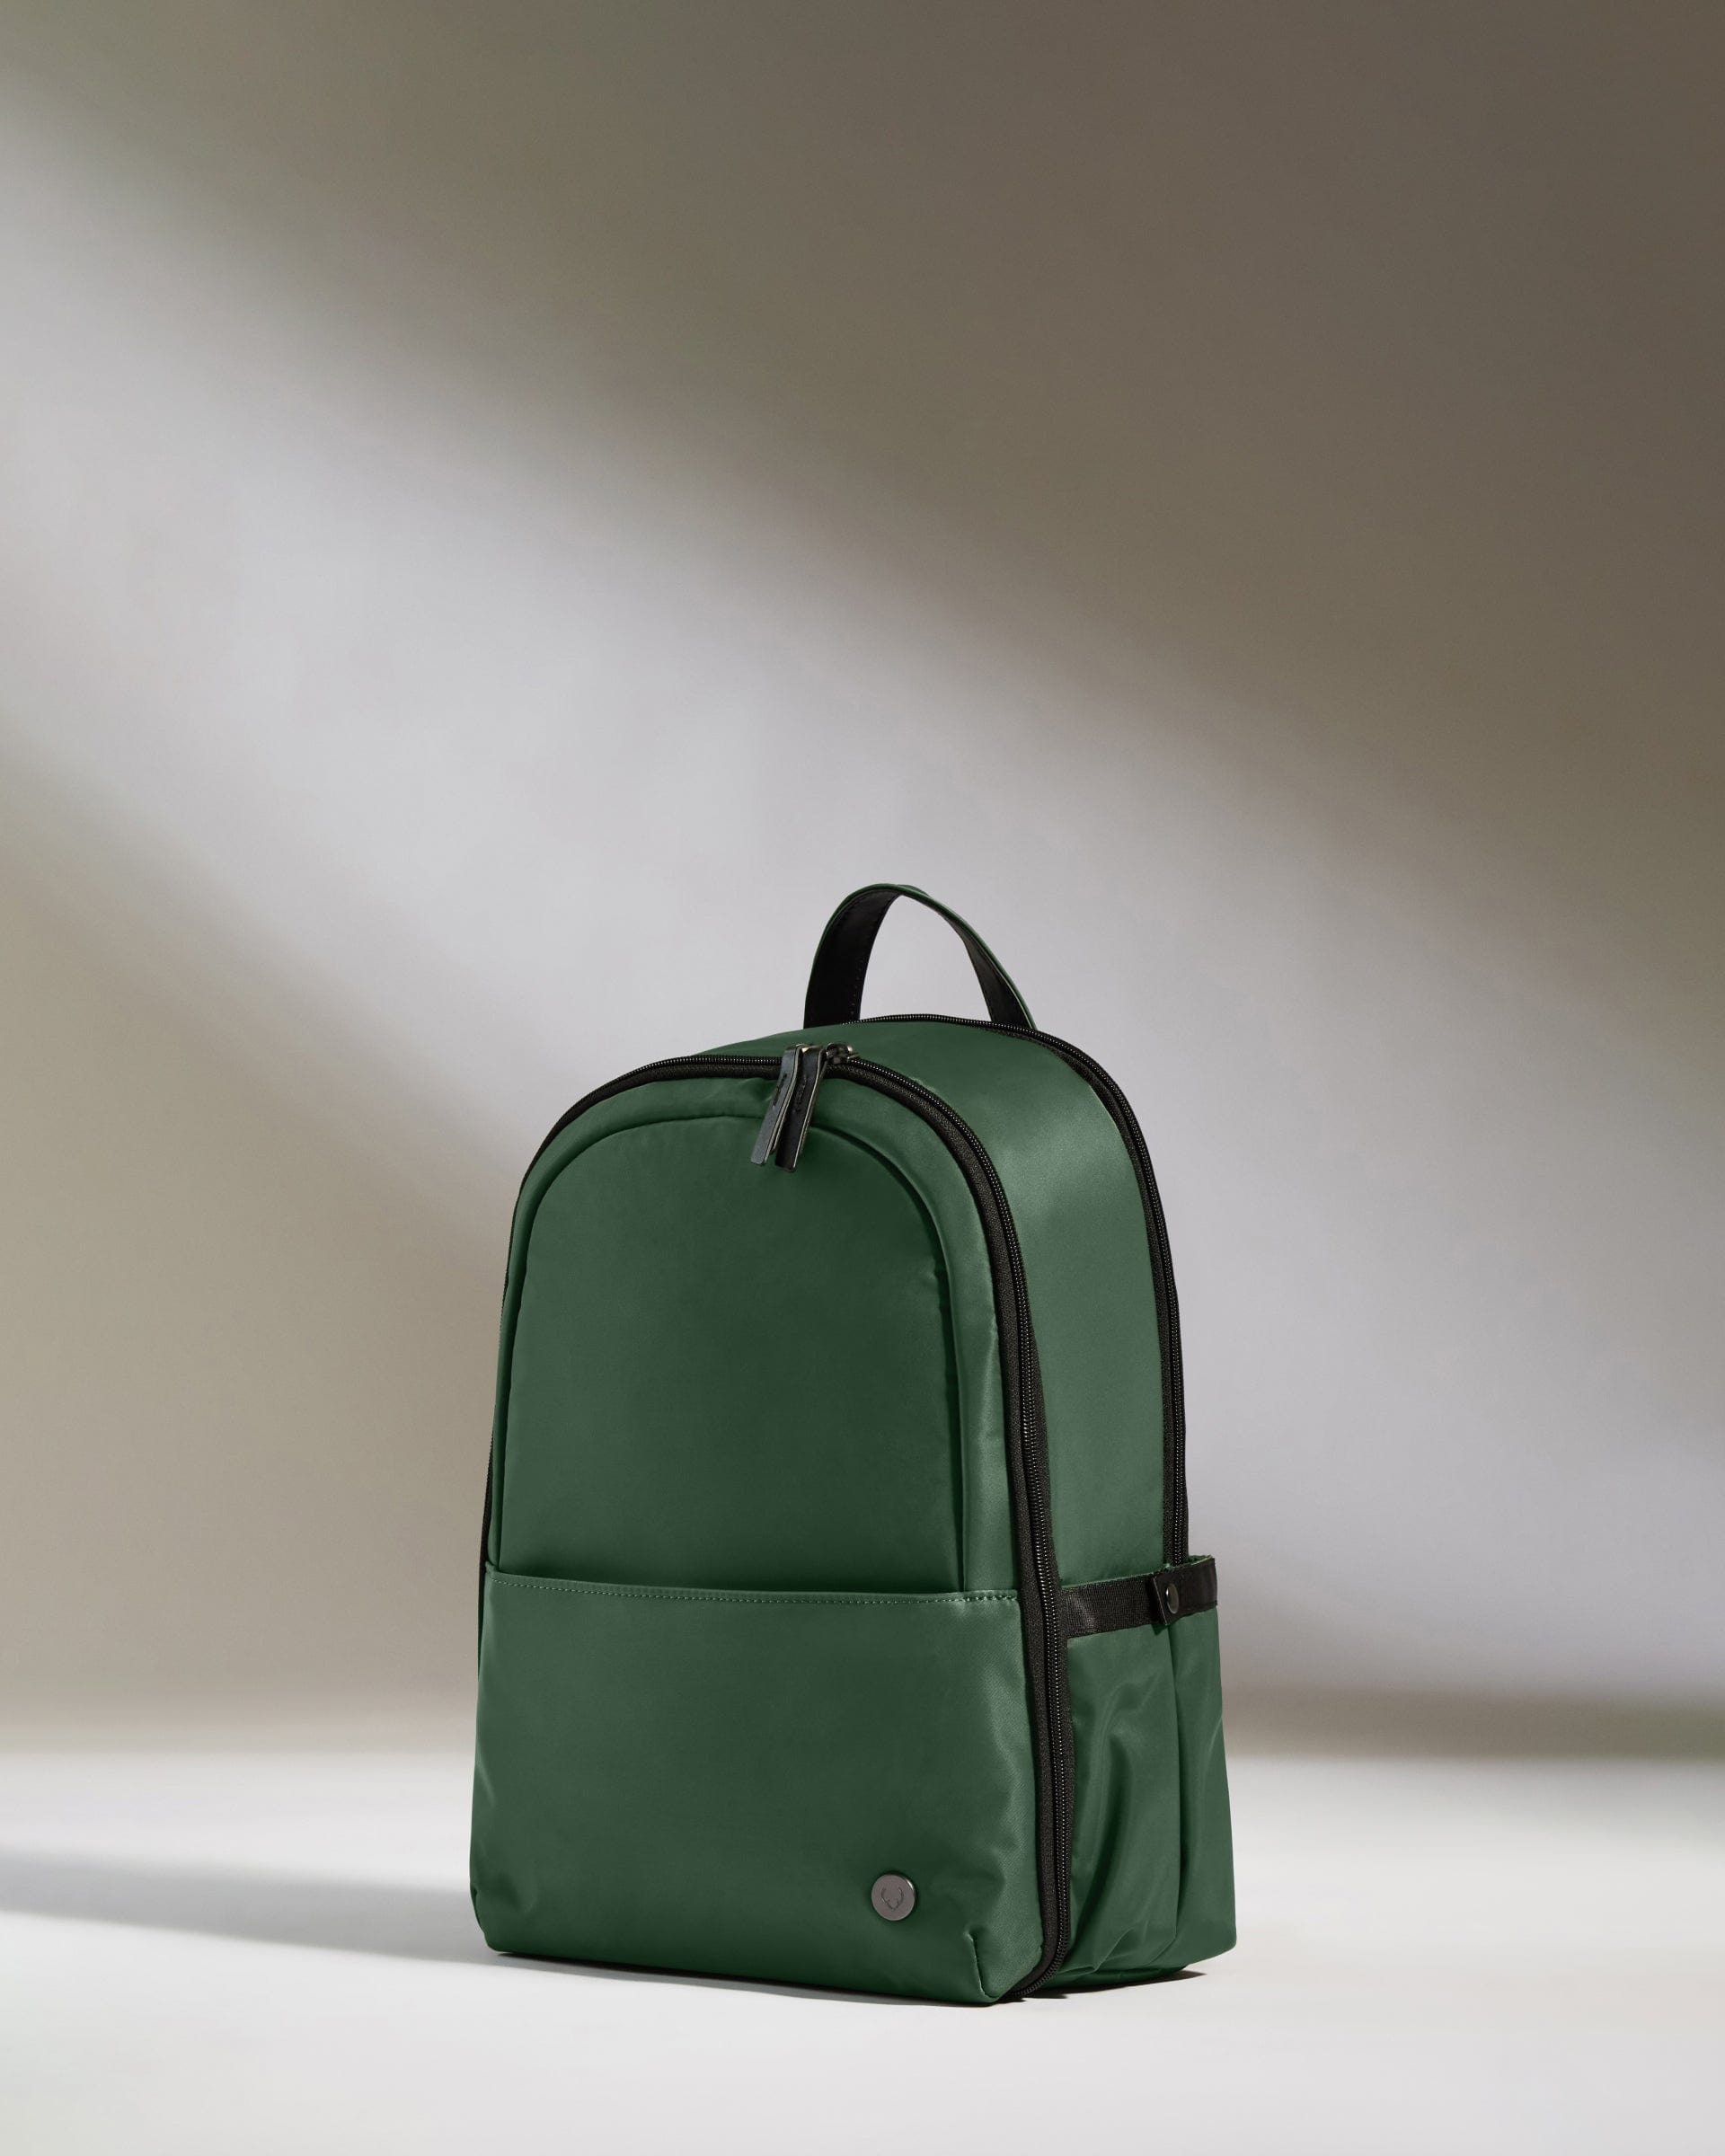 View Antler Chelsea Backpack In Woodland Green Size 17cm x 28cm x 40cm information